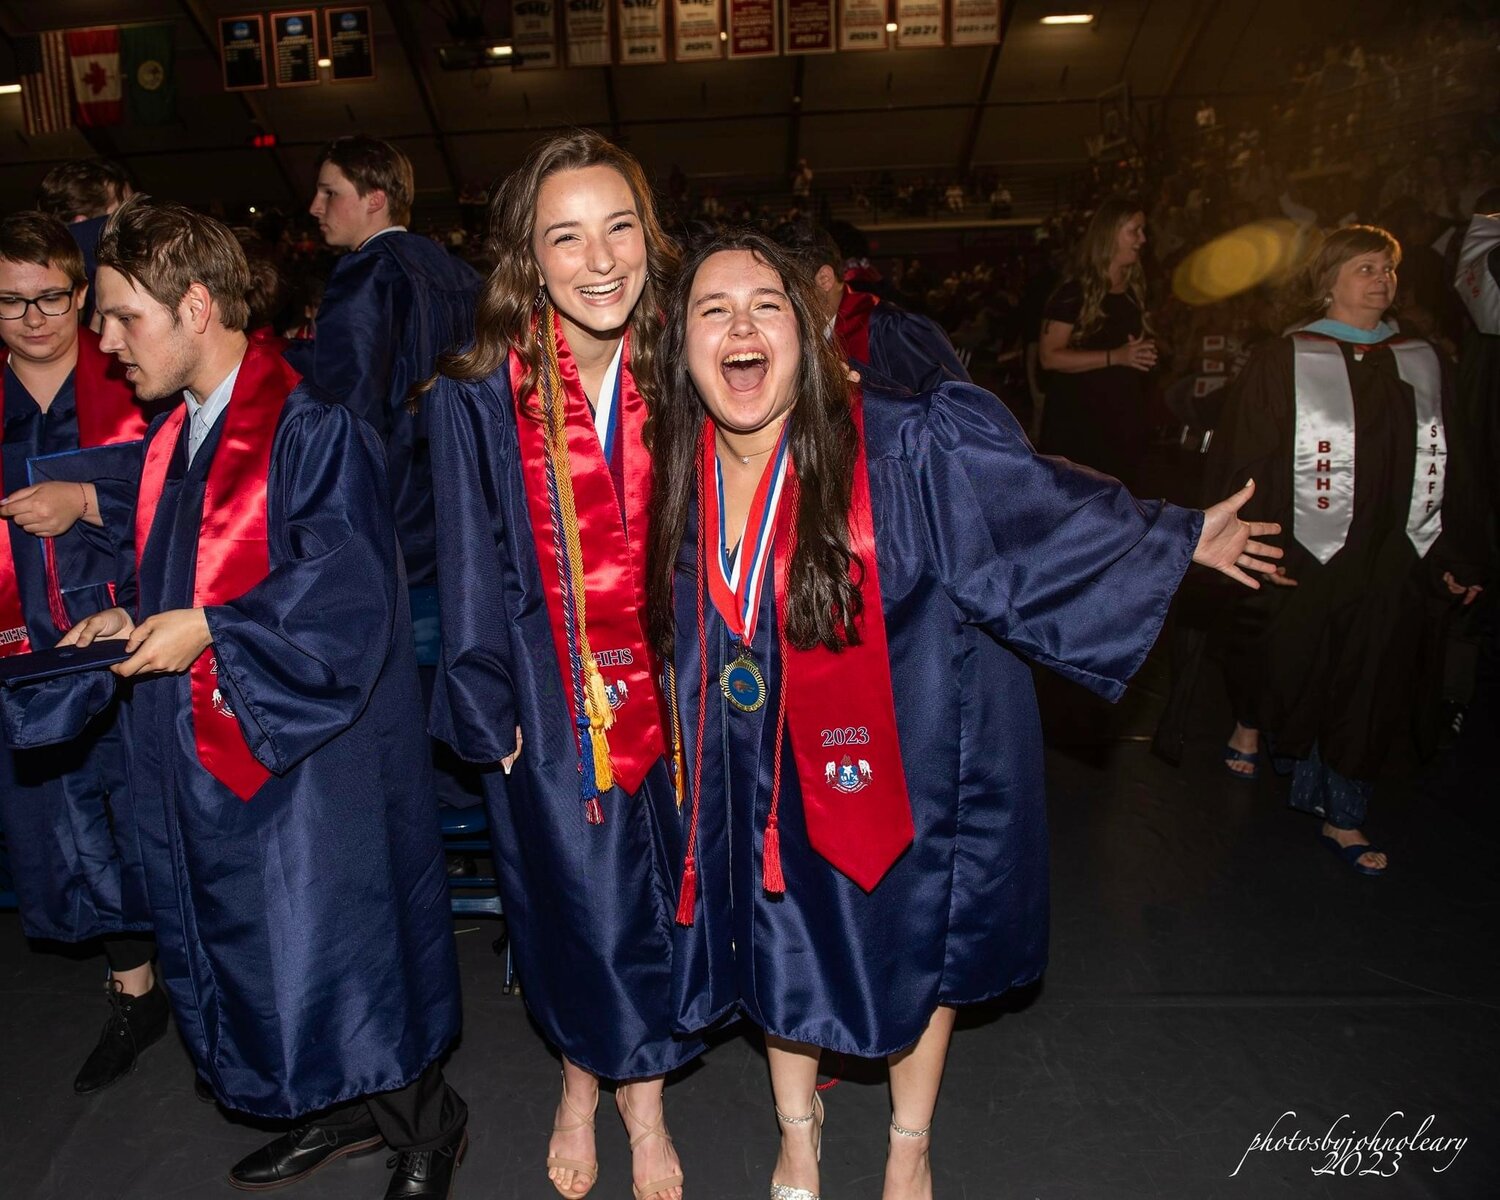 Newly graduated Wolves show their smiles.